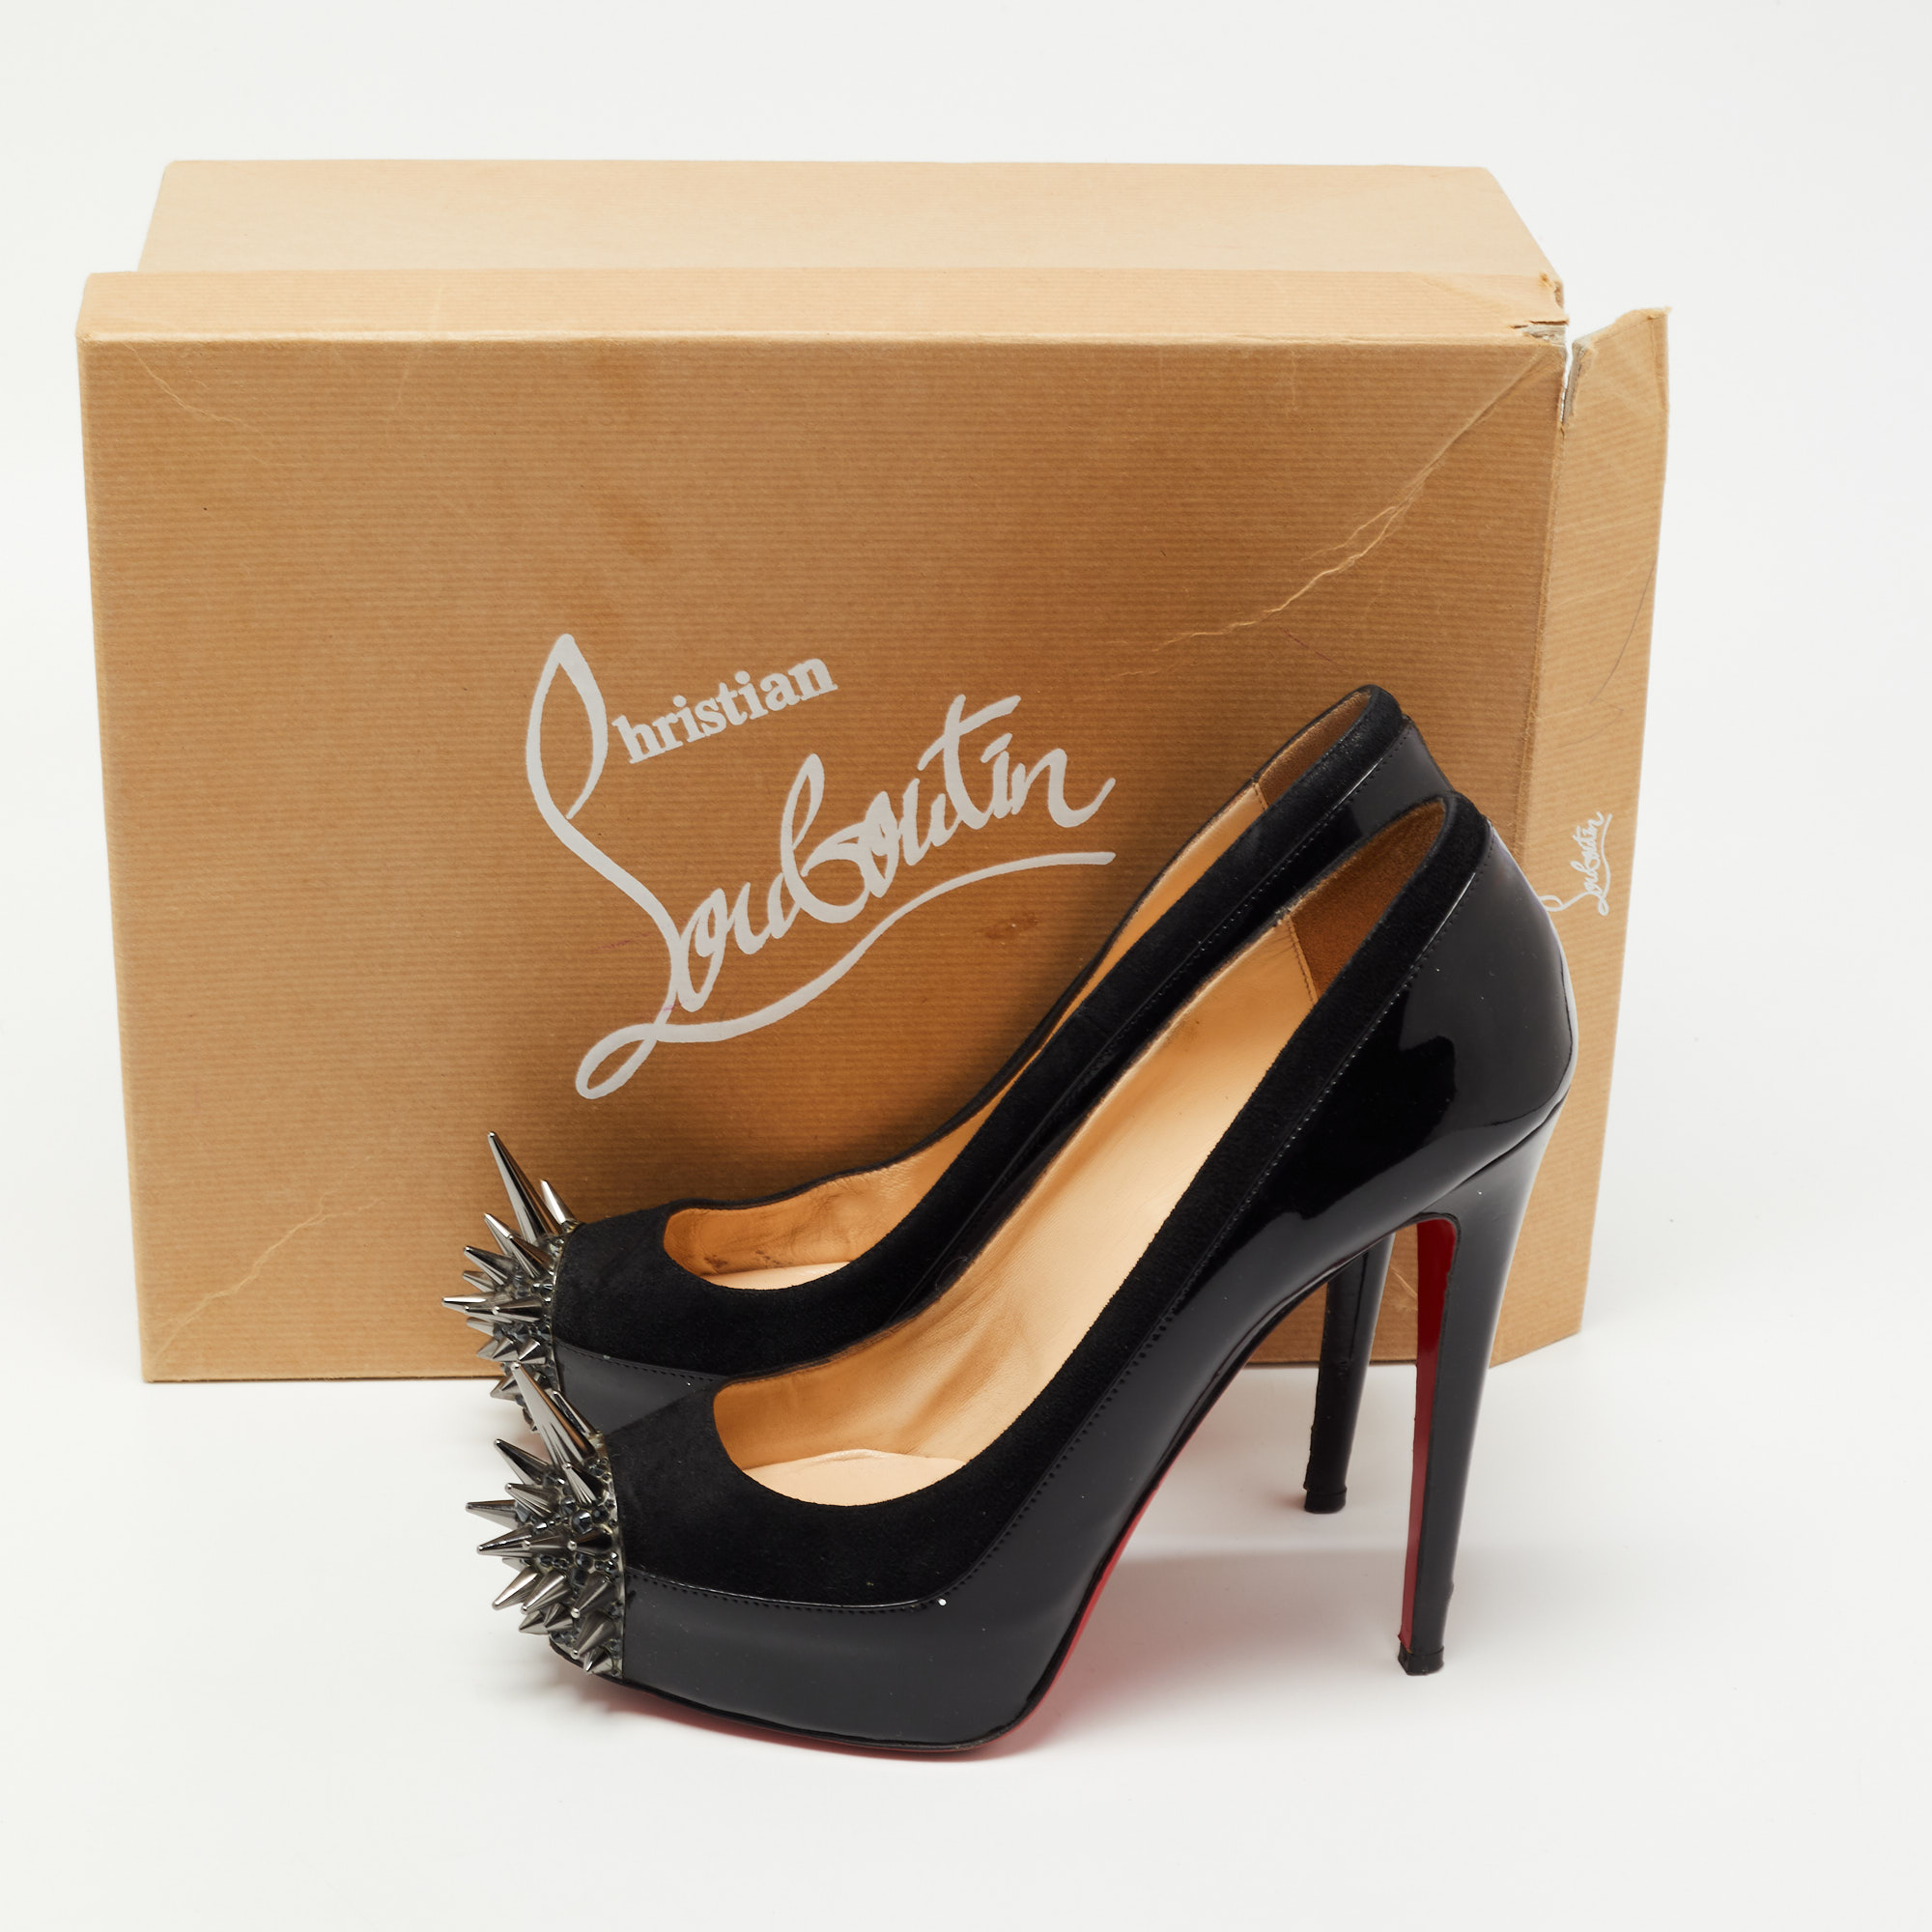 Christian Louboutin Black Patent And Suede Asteroid Pumps Size 38.5